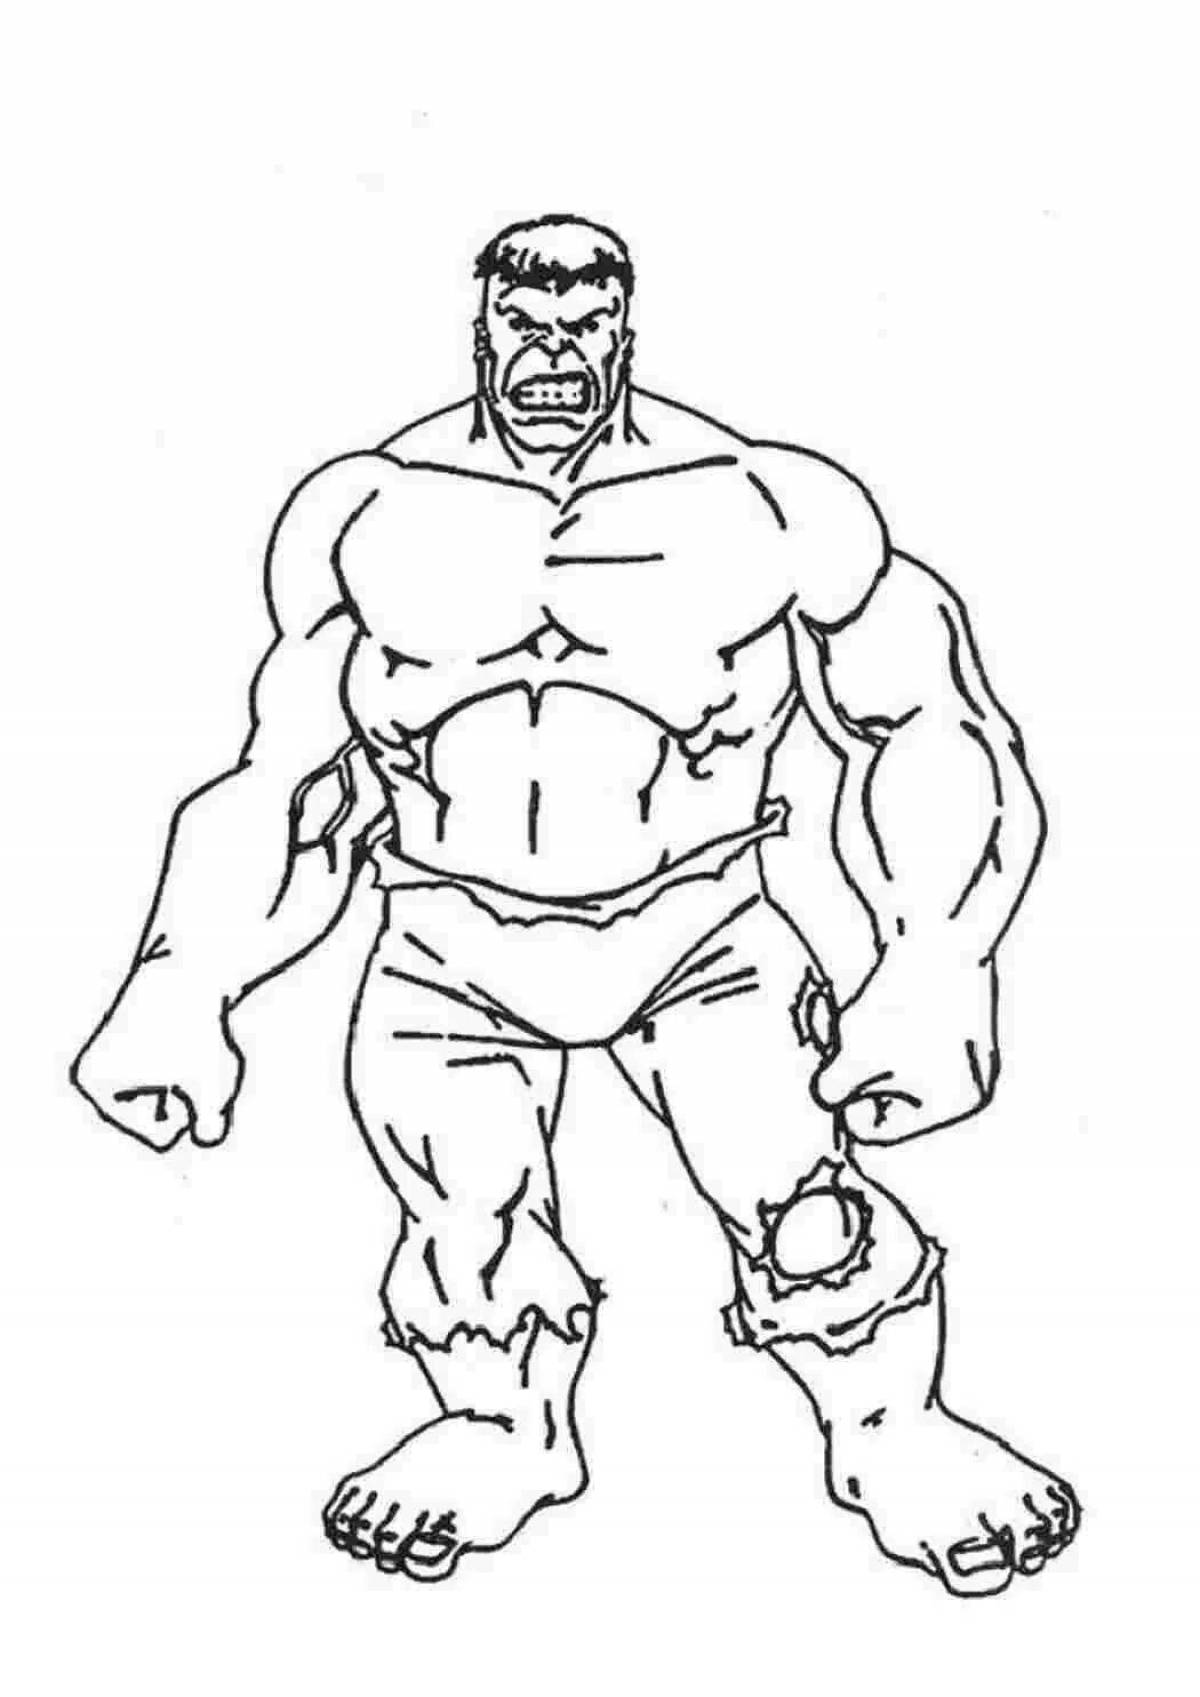 Heroic hulk coloring page for boys